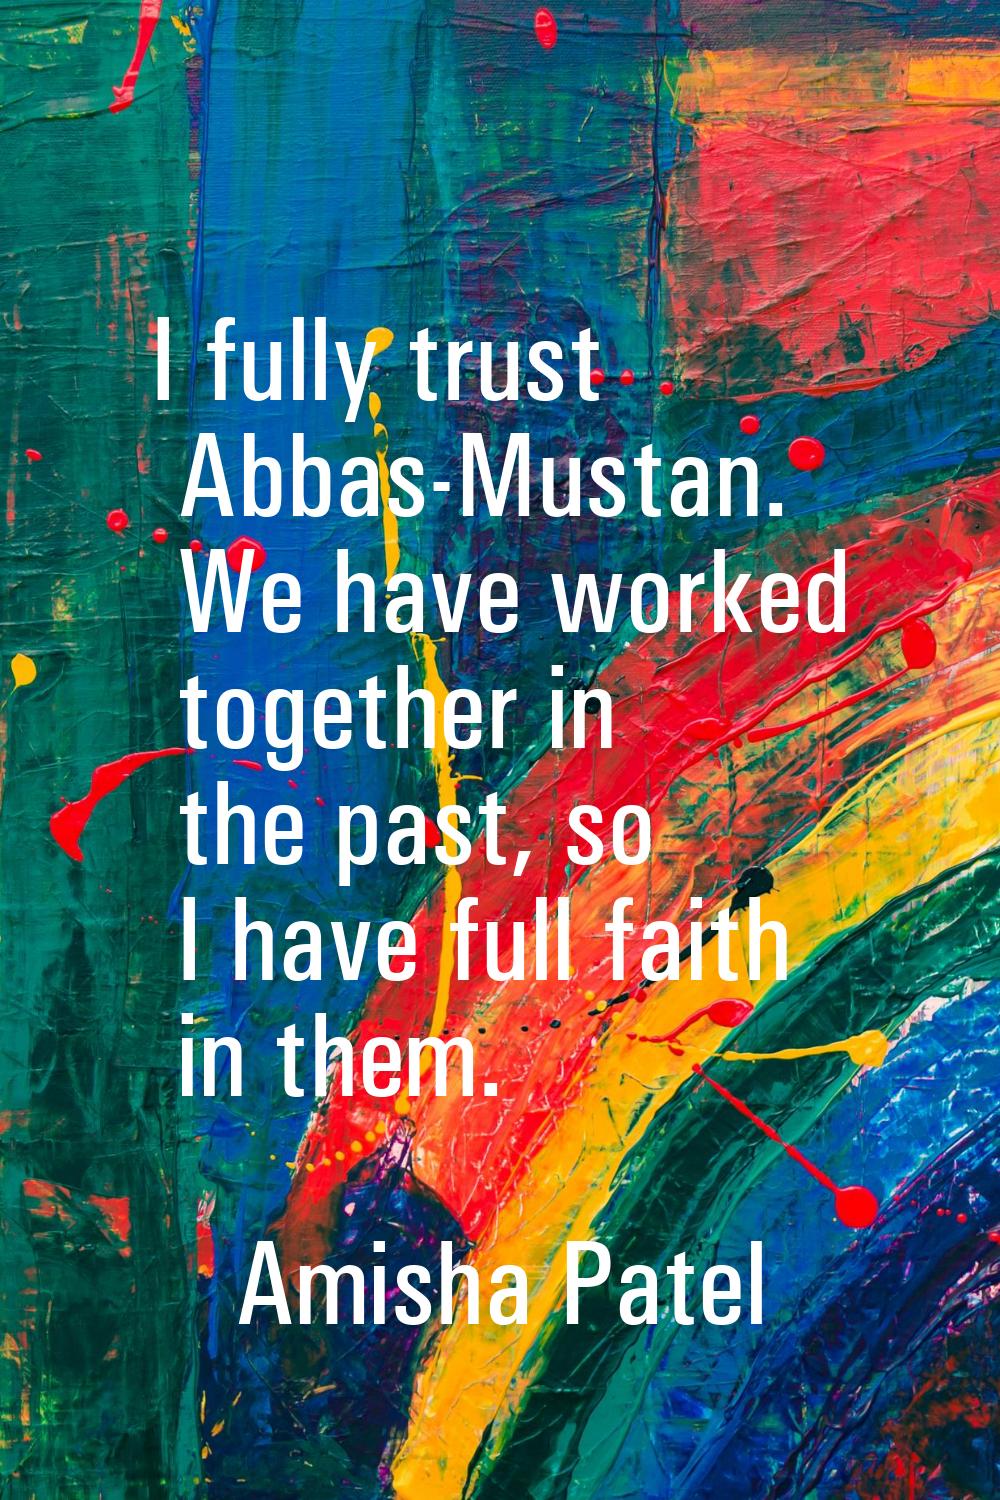 I fully trust Abbas-Mustan. We have worked together in the past, so I have full faith in them.